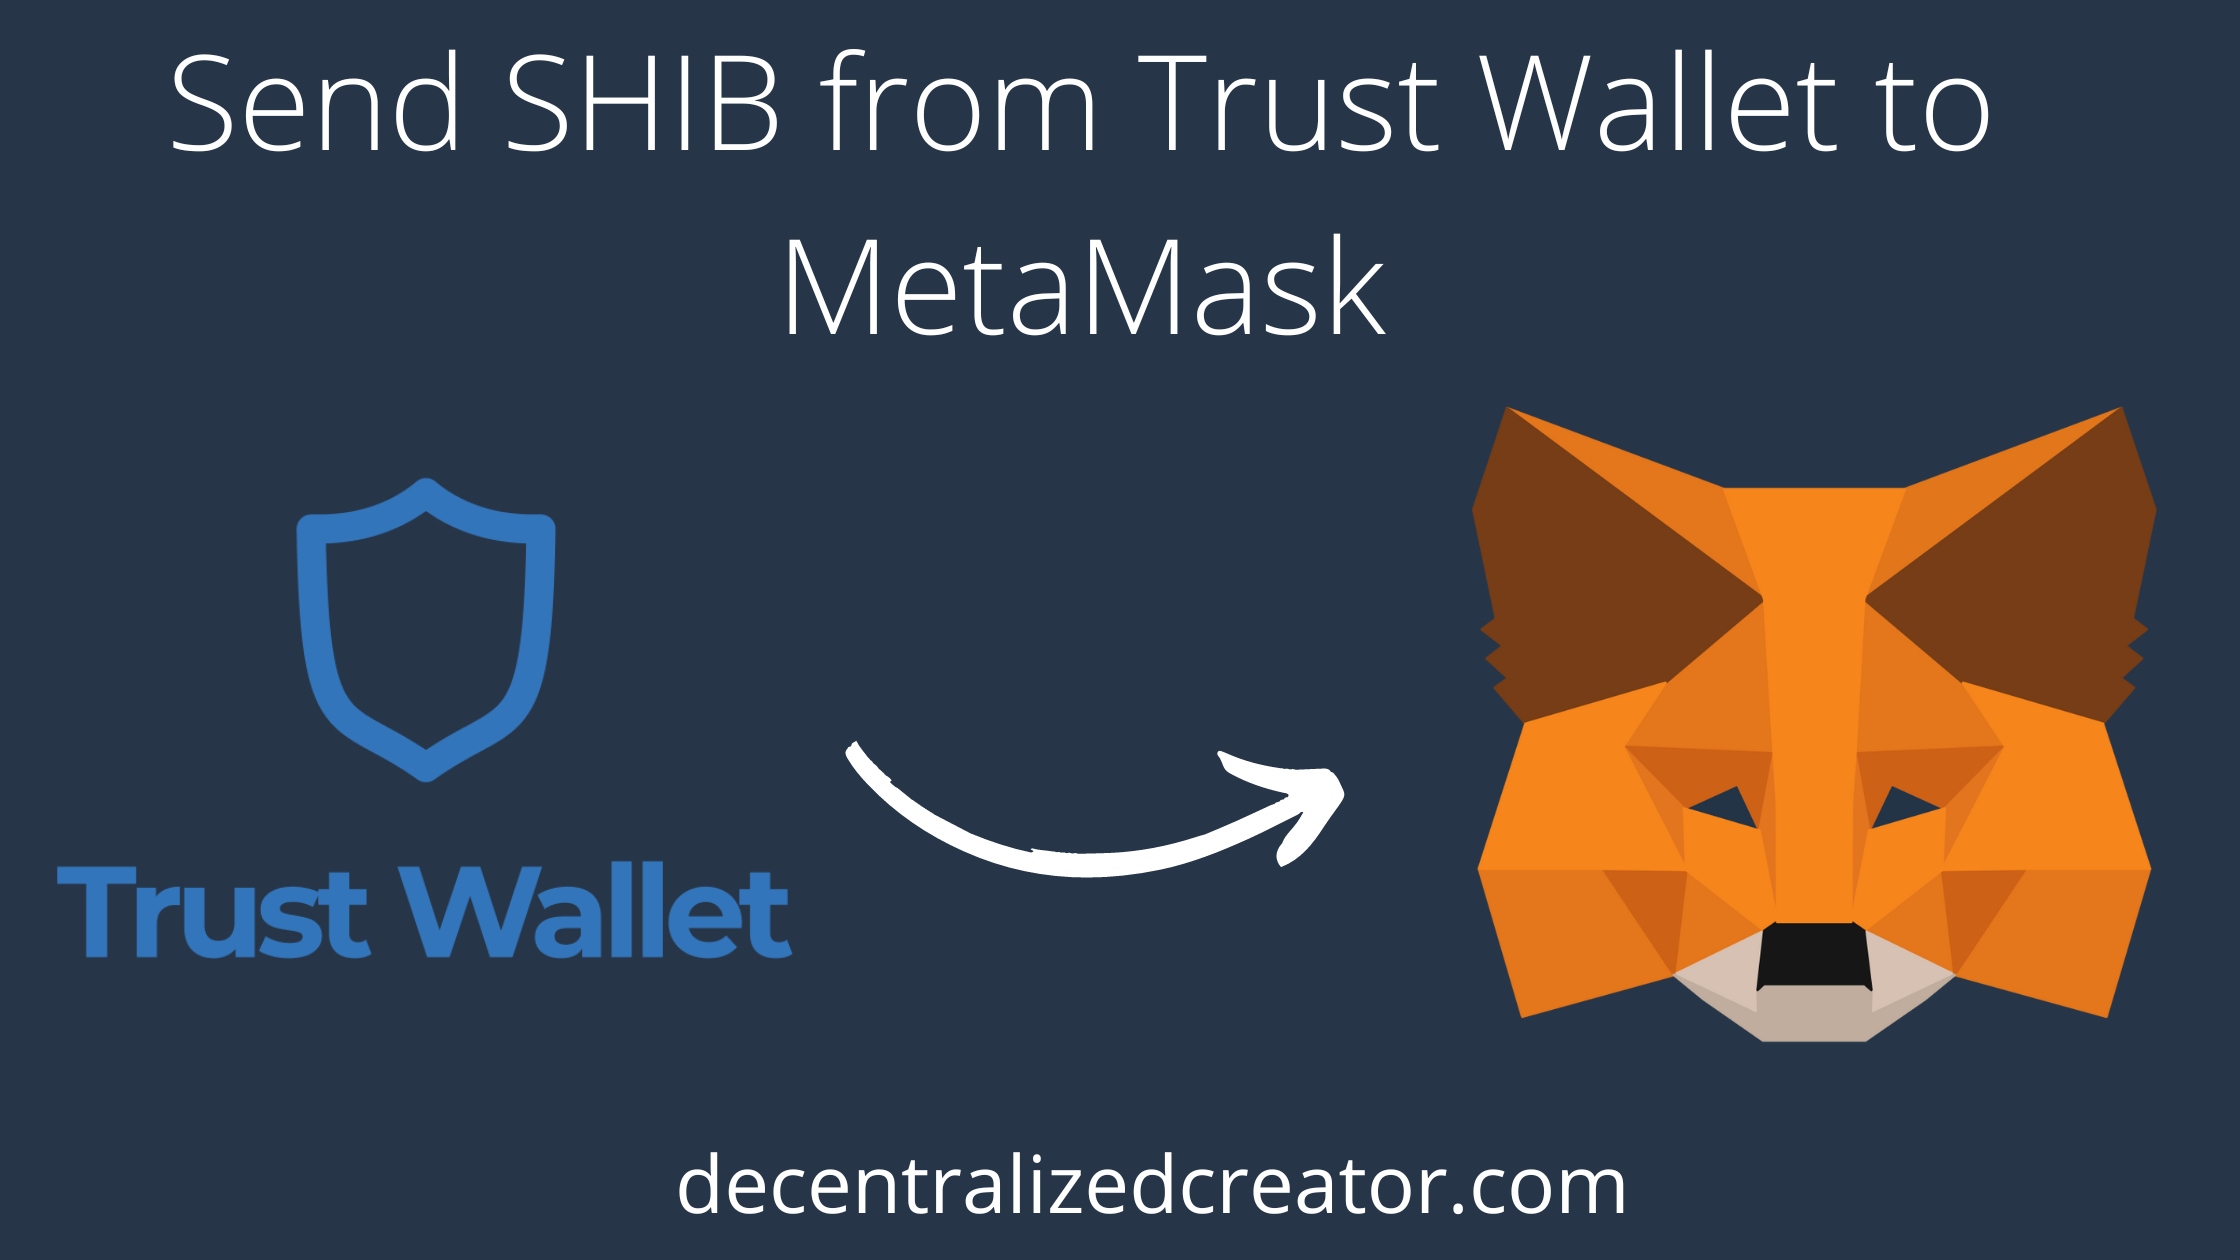 SHIB from Trust Wallet to MetaMask